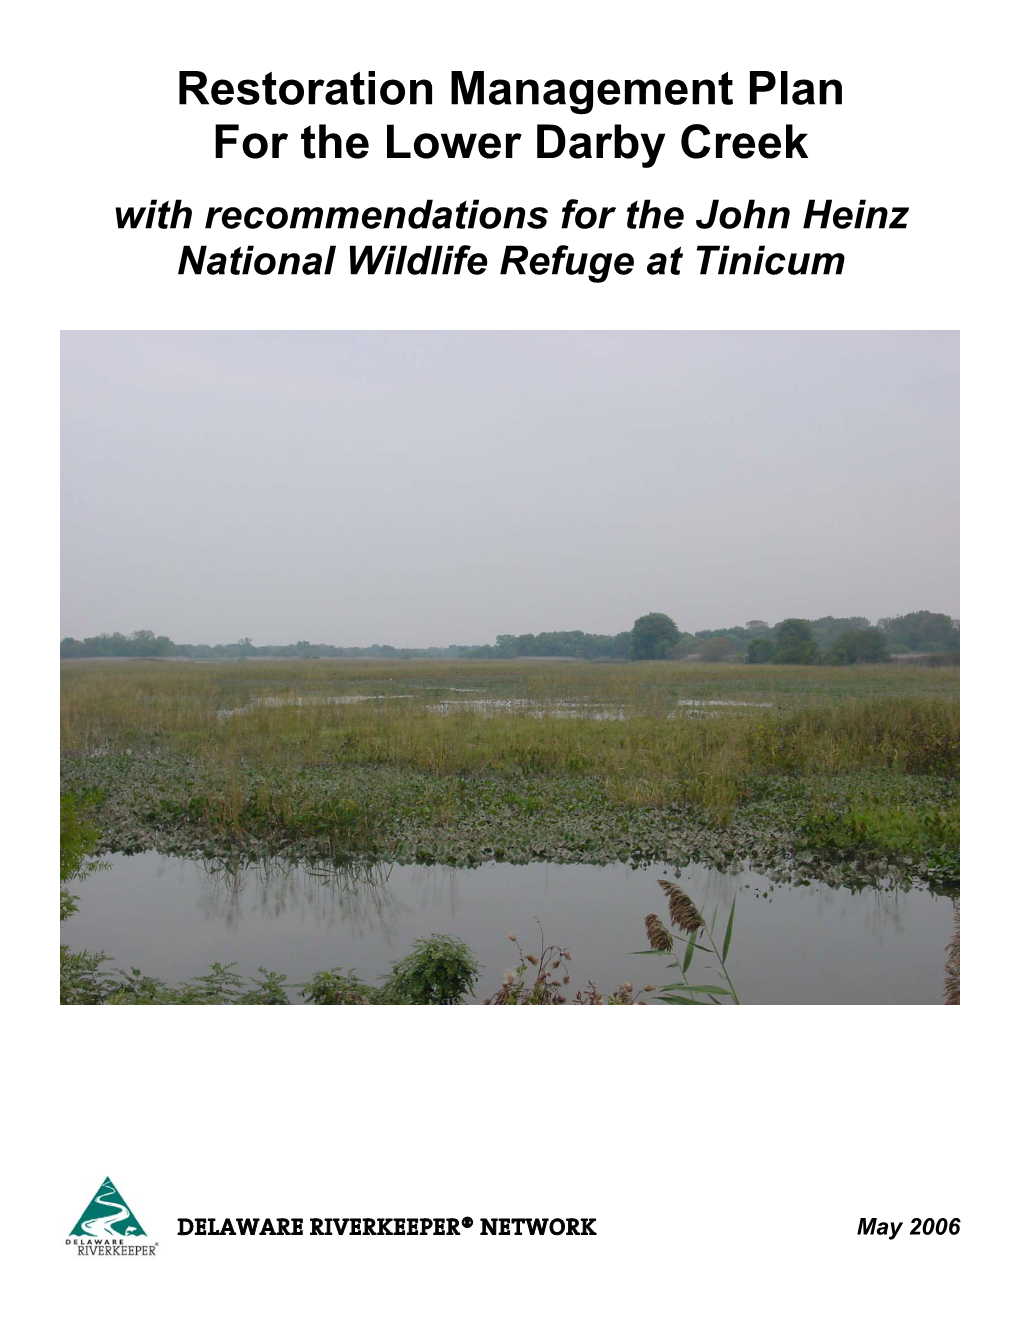 Restoration Management Plan for the Lower Darby Creek with Recommendations for the John Heinz National Wildlife Refuge at Tinicum